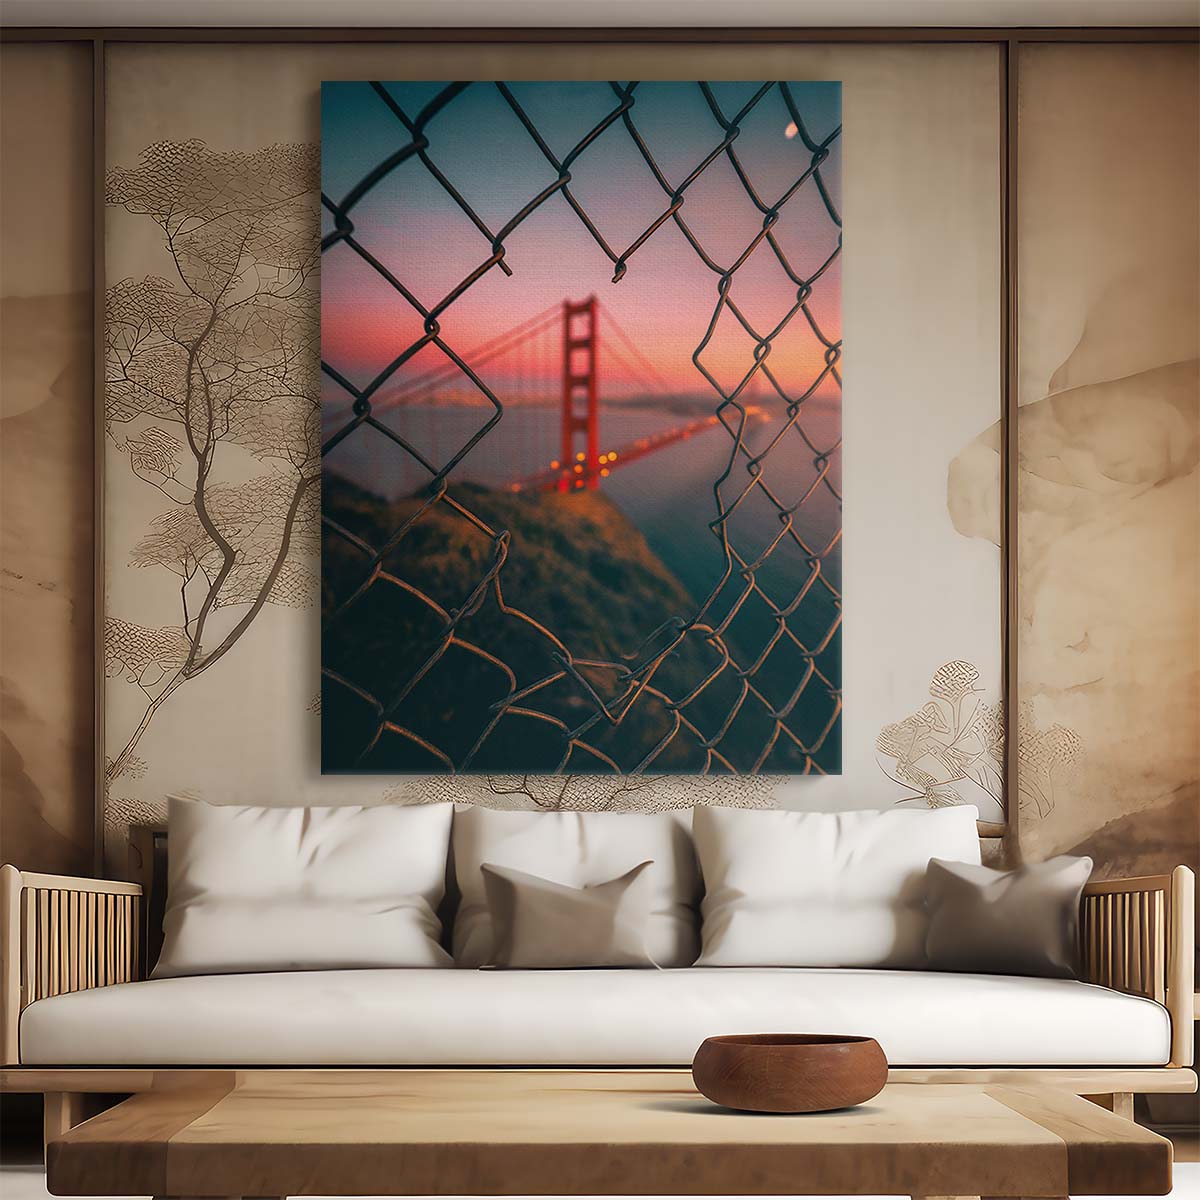 Iconic Golden Gate Bridge, San Francisco Sunset Photography Art by Luxuriance Designs, made in USA